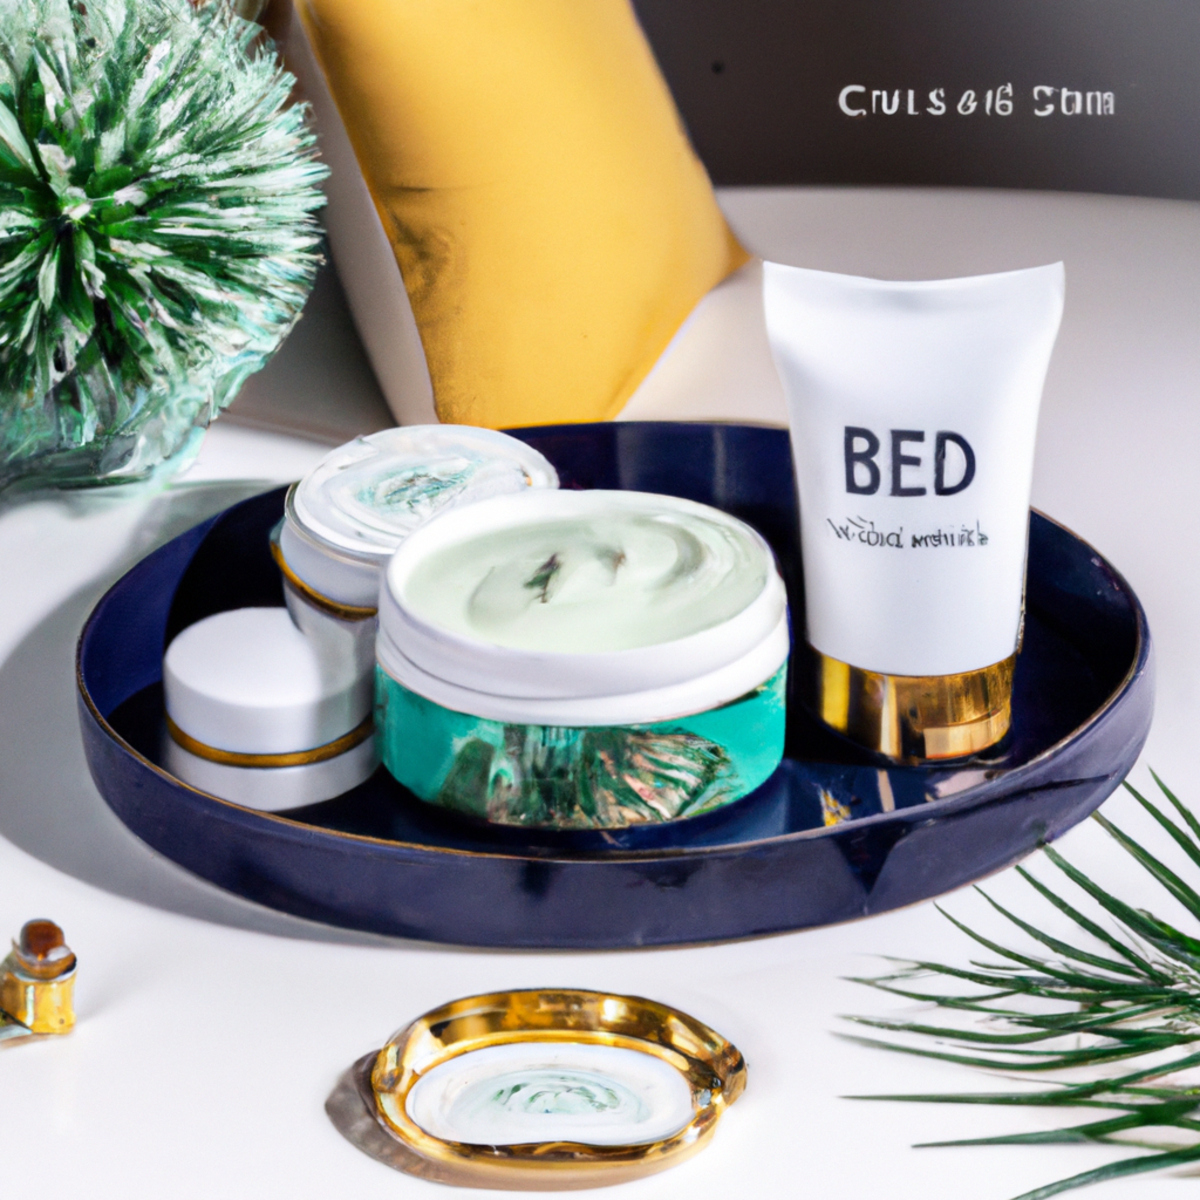 CBD-infused skincare display: luxurious face cream, botanical masks, fluffy brush, lavender and chamomile bouquet. Alluring elegance, intrigue, skincare upgrade?